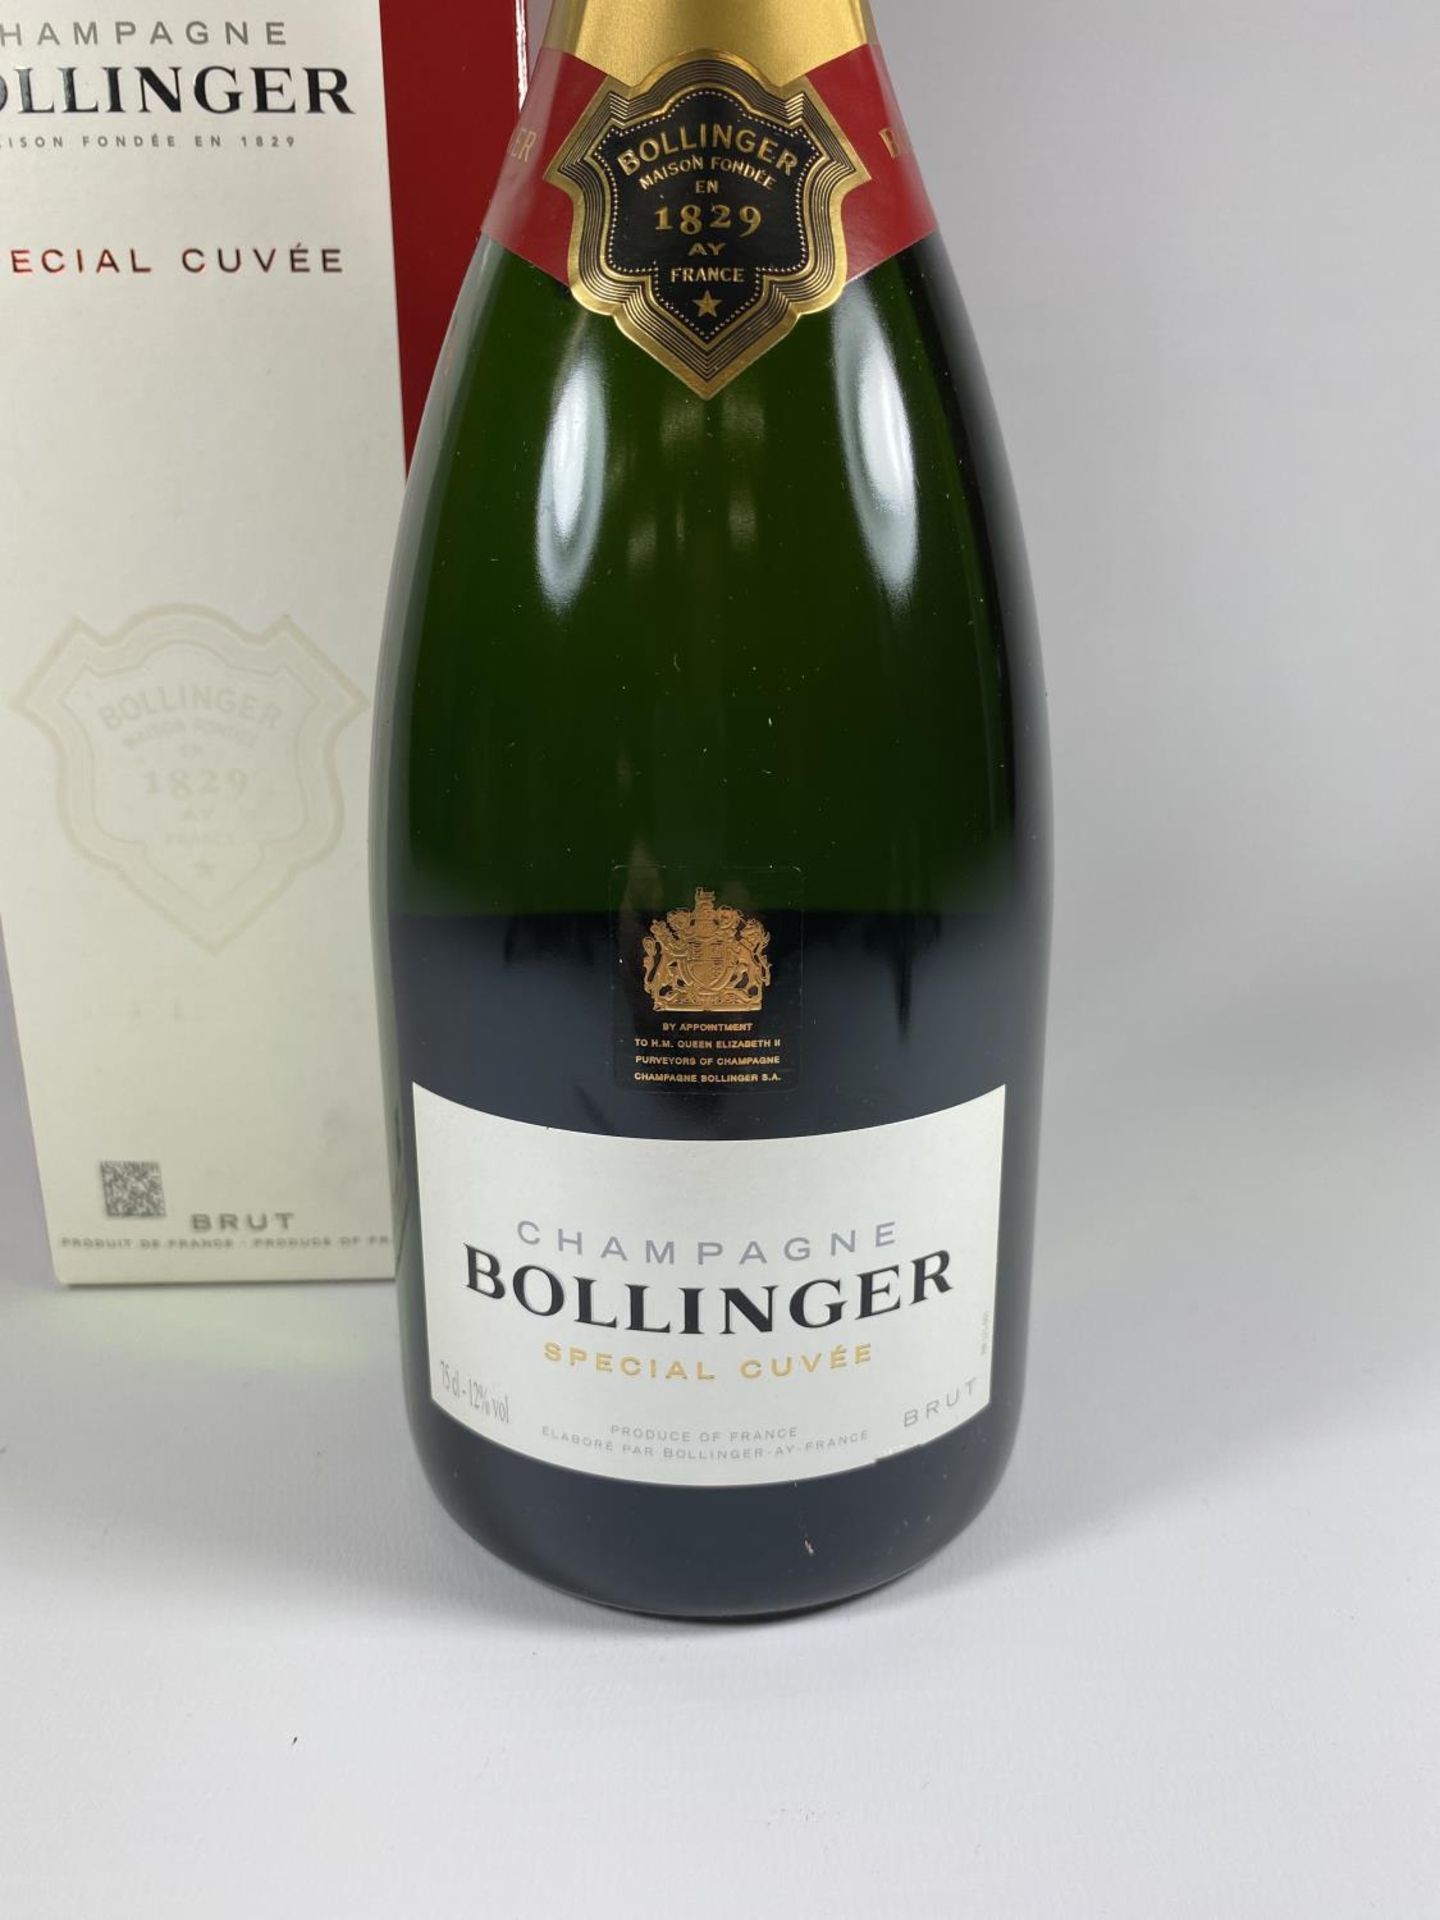 1 X 75CL BOXED BOTTLE - BOLLINGER SPECIAL CUVEE CHAMPAGNE - Image 2 of 3